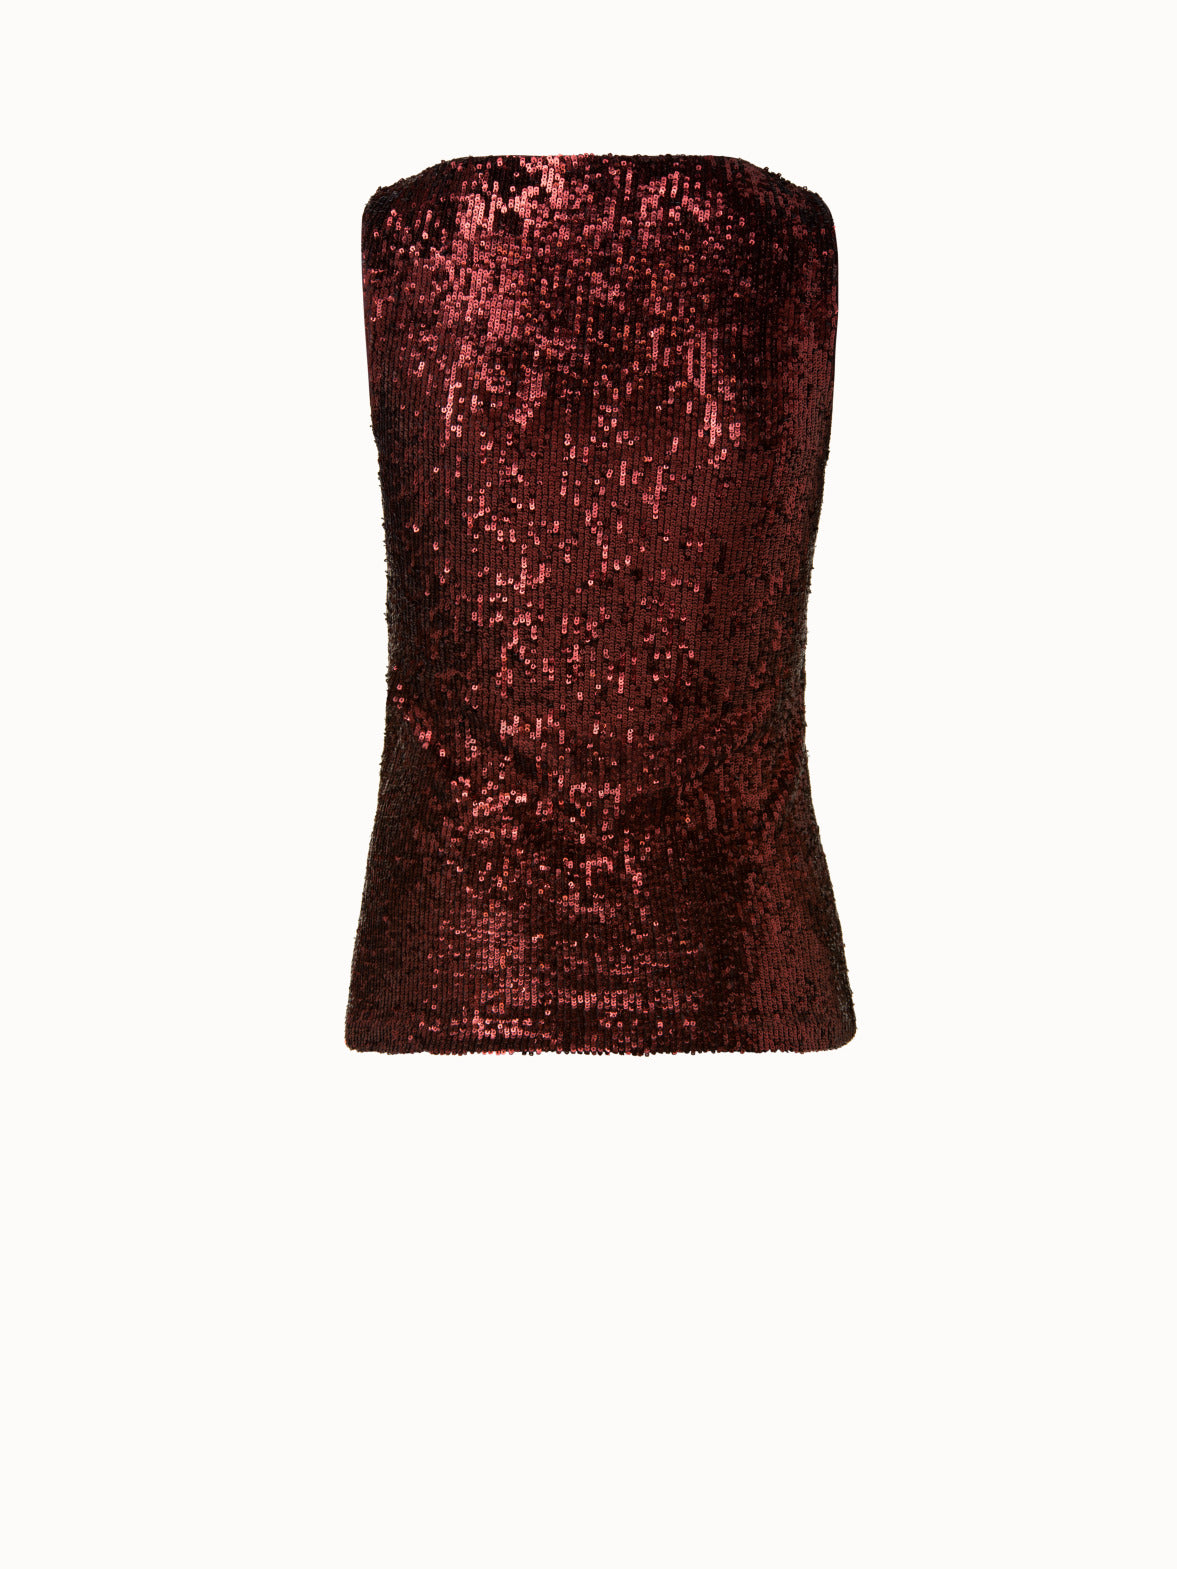 Sequins On Jersey Tank